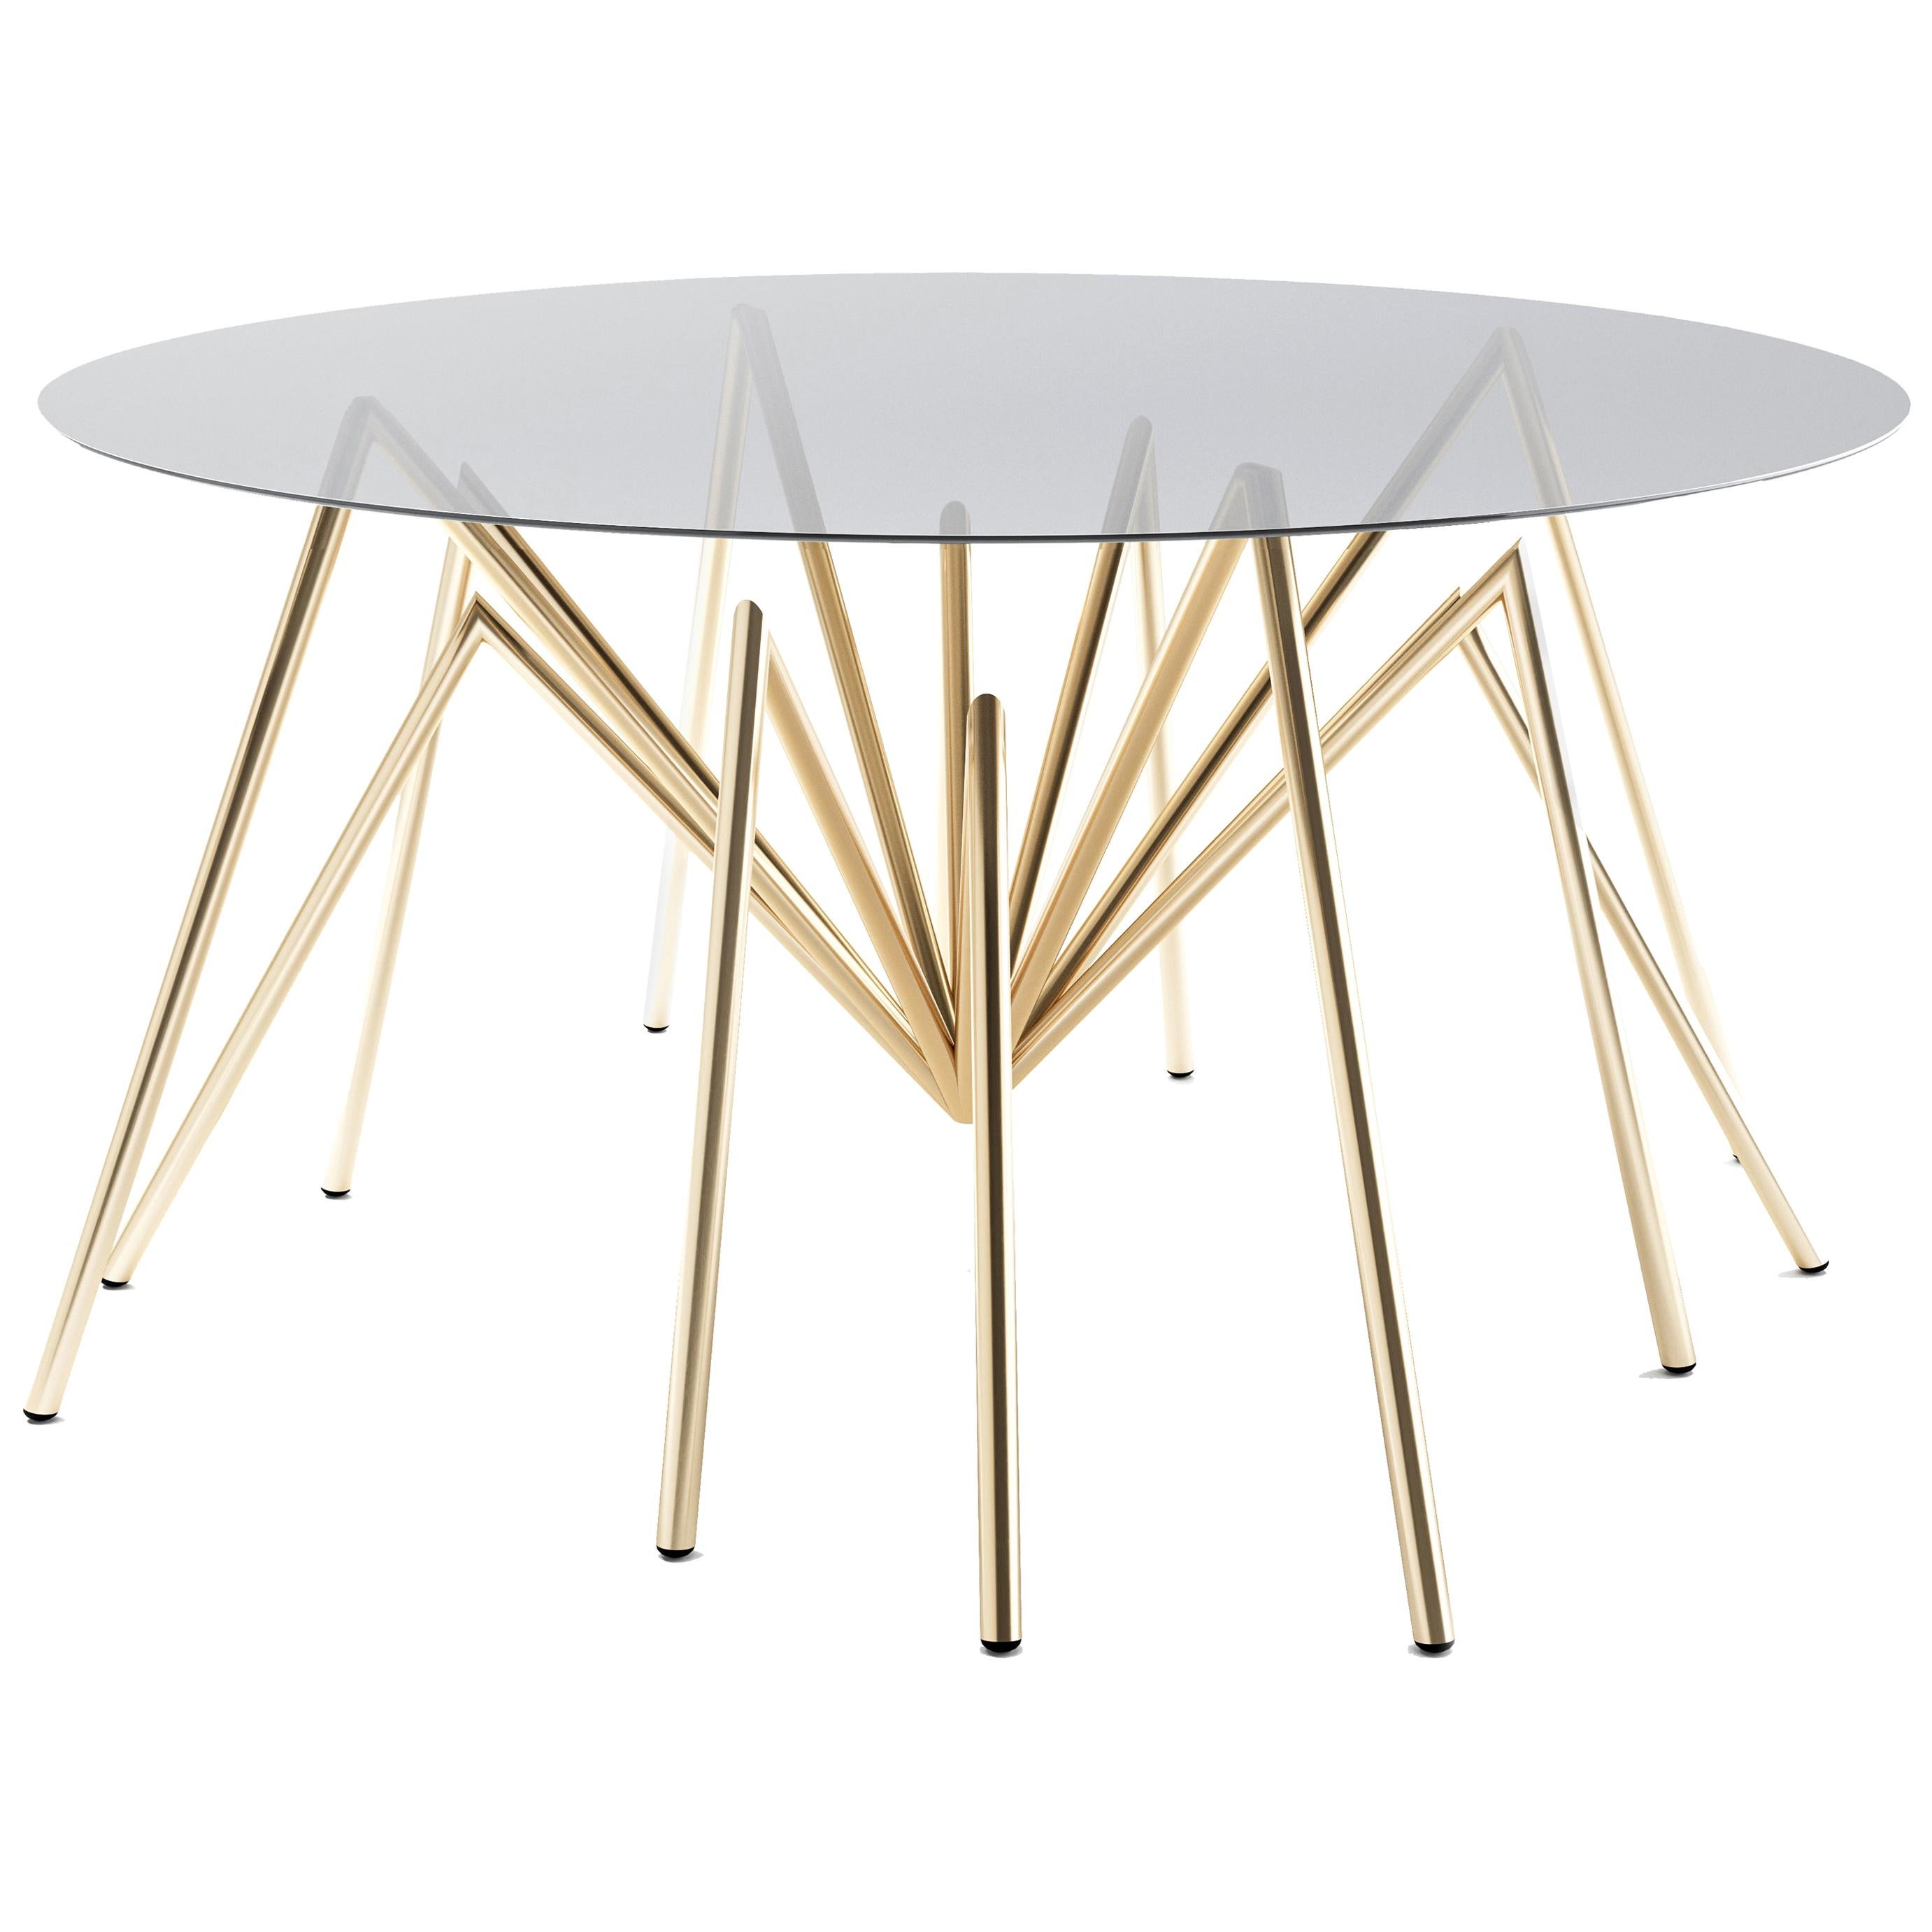 Zeville "Ennox 7 Spider", Swiss-Made Gold-Plated Lounge Table For Sale